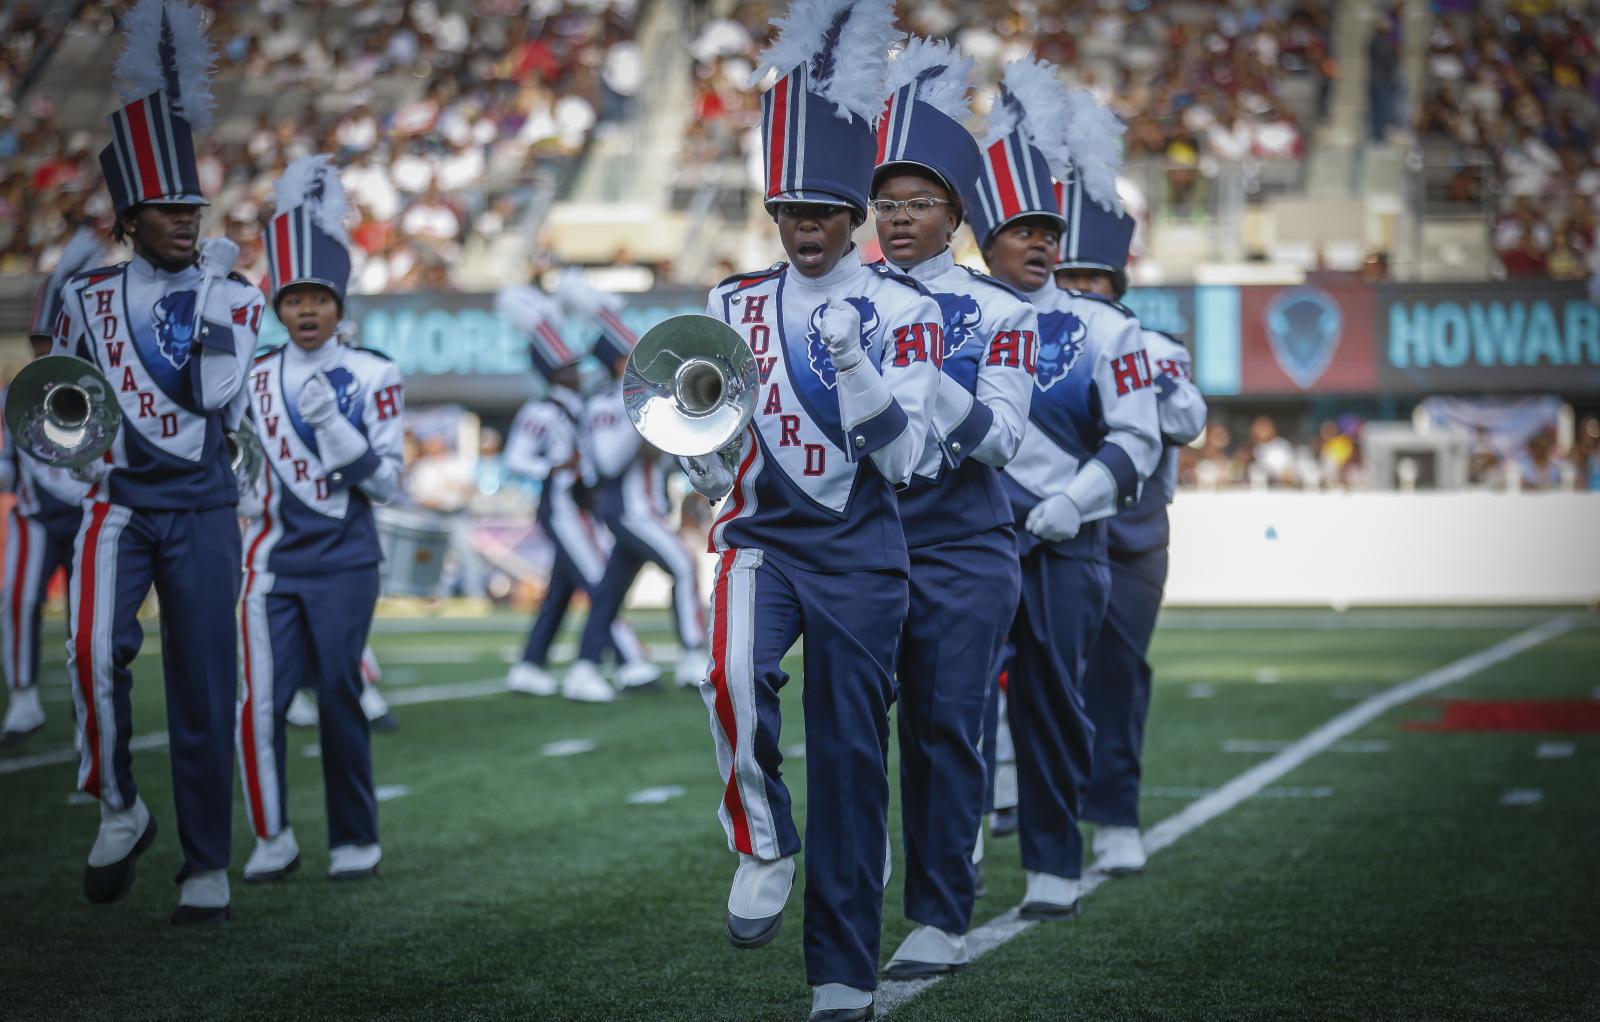 Howard marching band in uniform